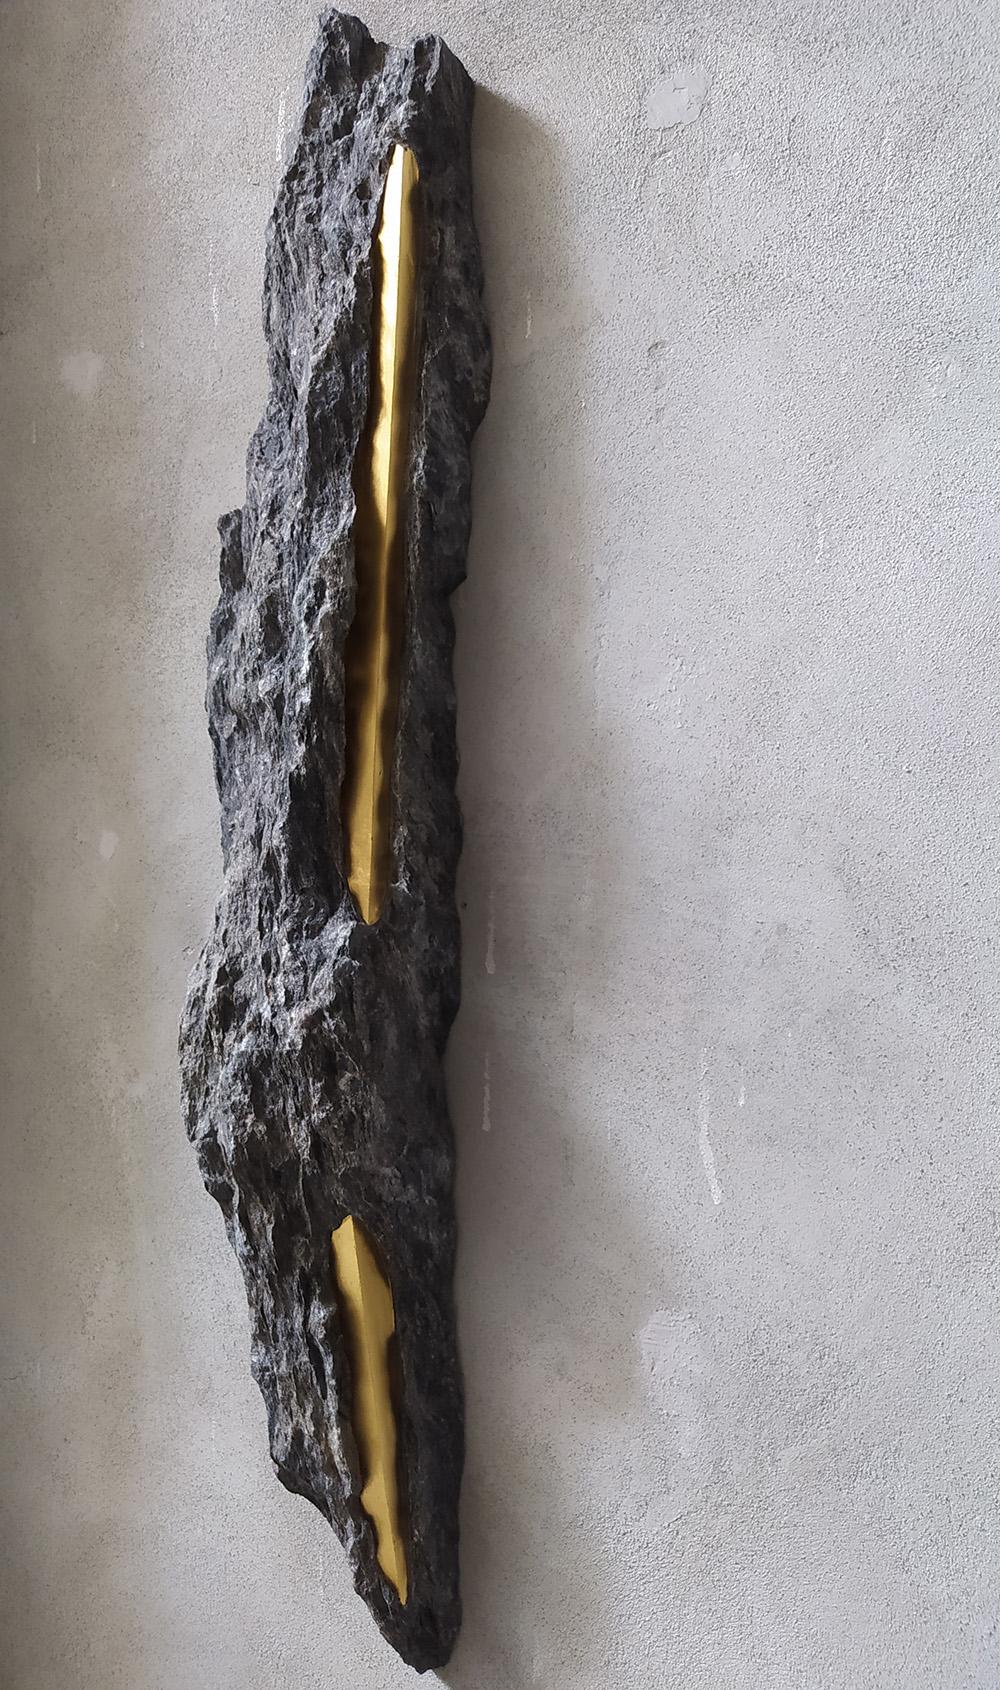 Sezione Aurea - A13 is a wall sculpture by Italian contemporary artist Mattia Bosco.
Palissandro marble and gold leaf, 82.5 cm × 15 cm × 9.5 cm. Unique work.
In his contemporary sculpture, Italian artist Mattia Bosco seeks to create a synthesis